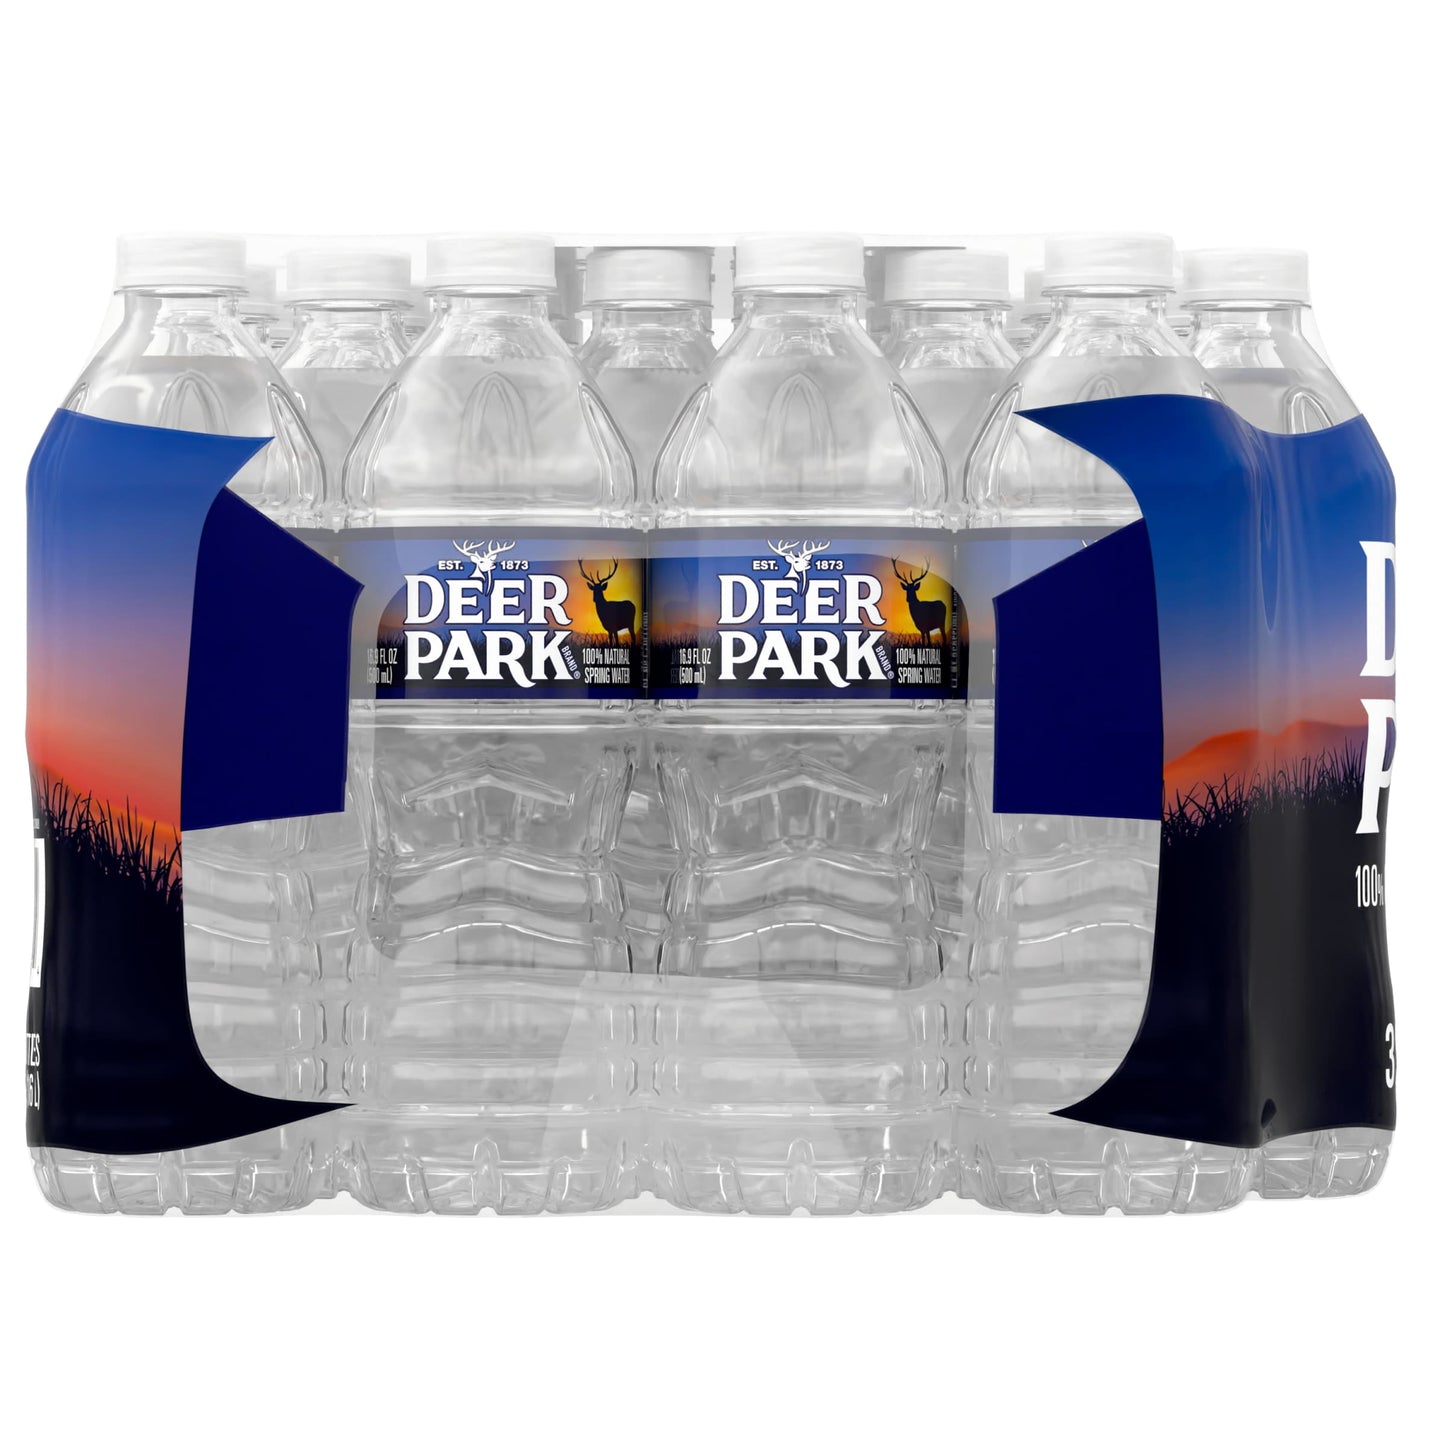 Brand 100% Natural Spring Water, 16.9-Ounce Plastic Bottles (Pack of 32)